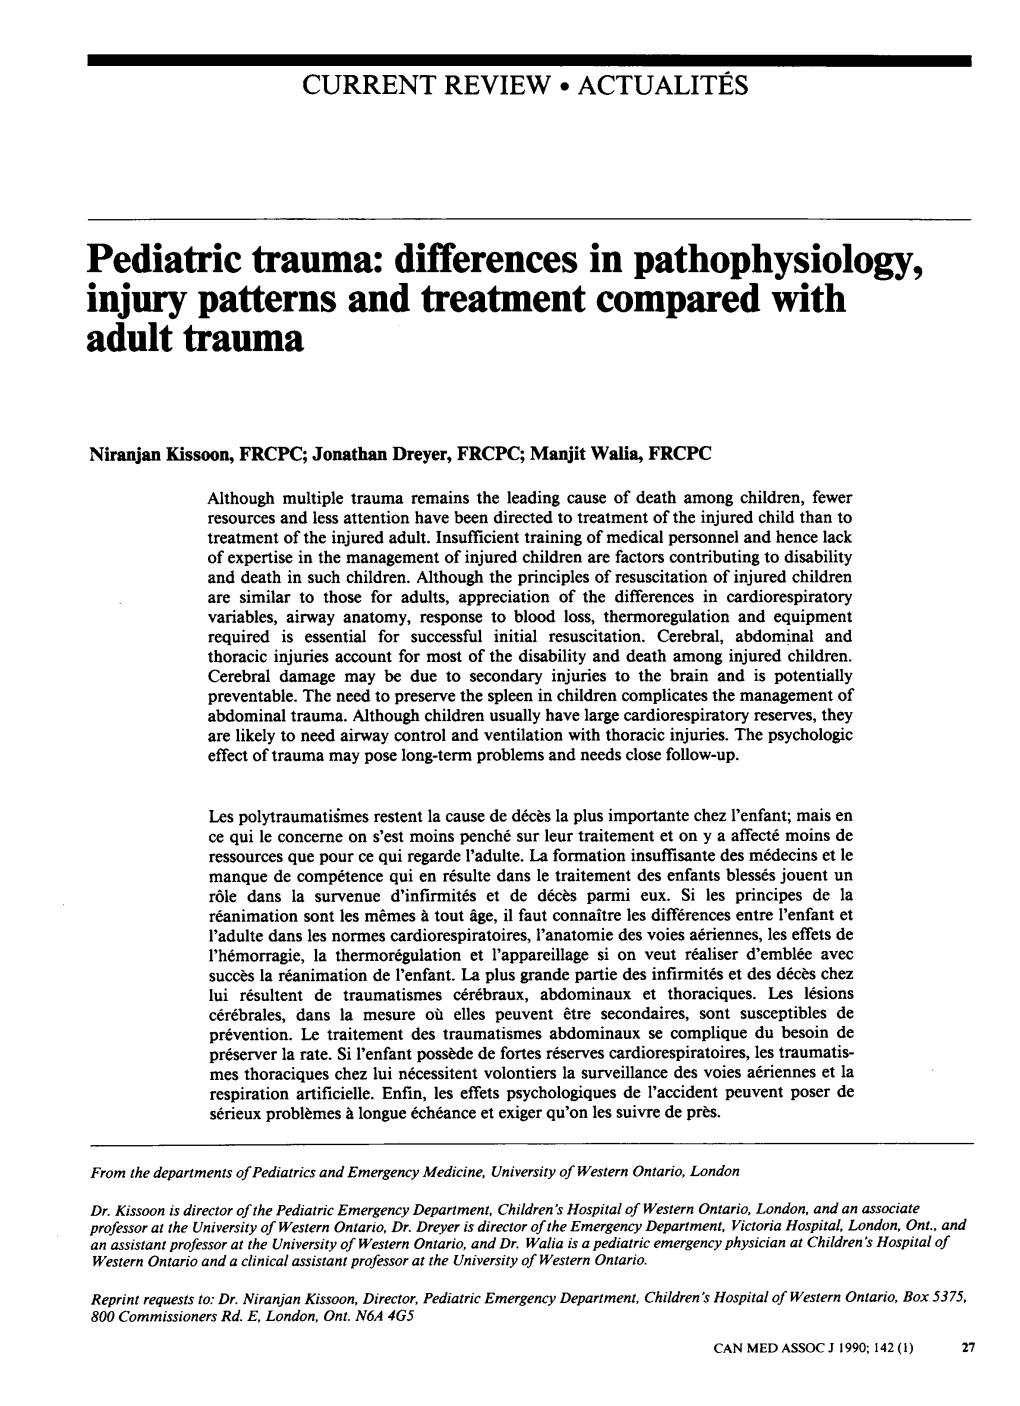 Pediatric Trauma: Differences in Pathophysiology, Injury Patterns and Treatment Compared with Adult Trauma